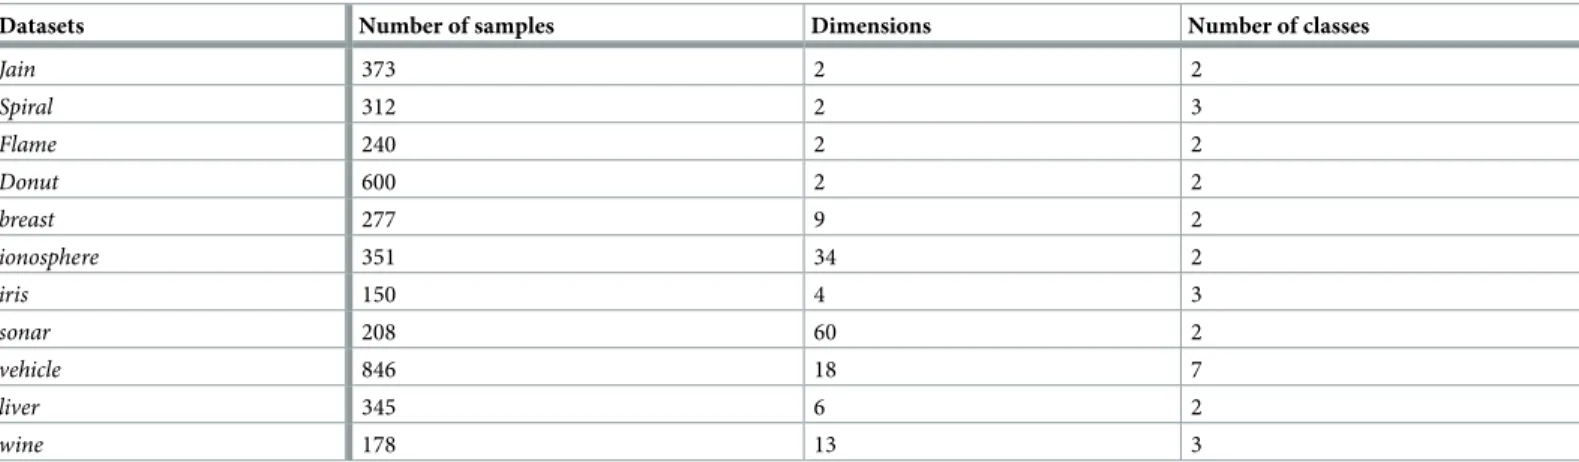 Table 1. The features of datasets.